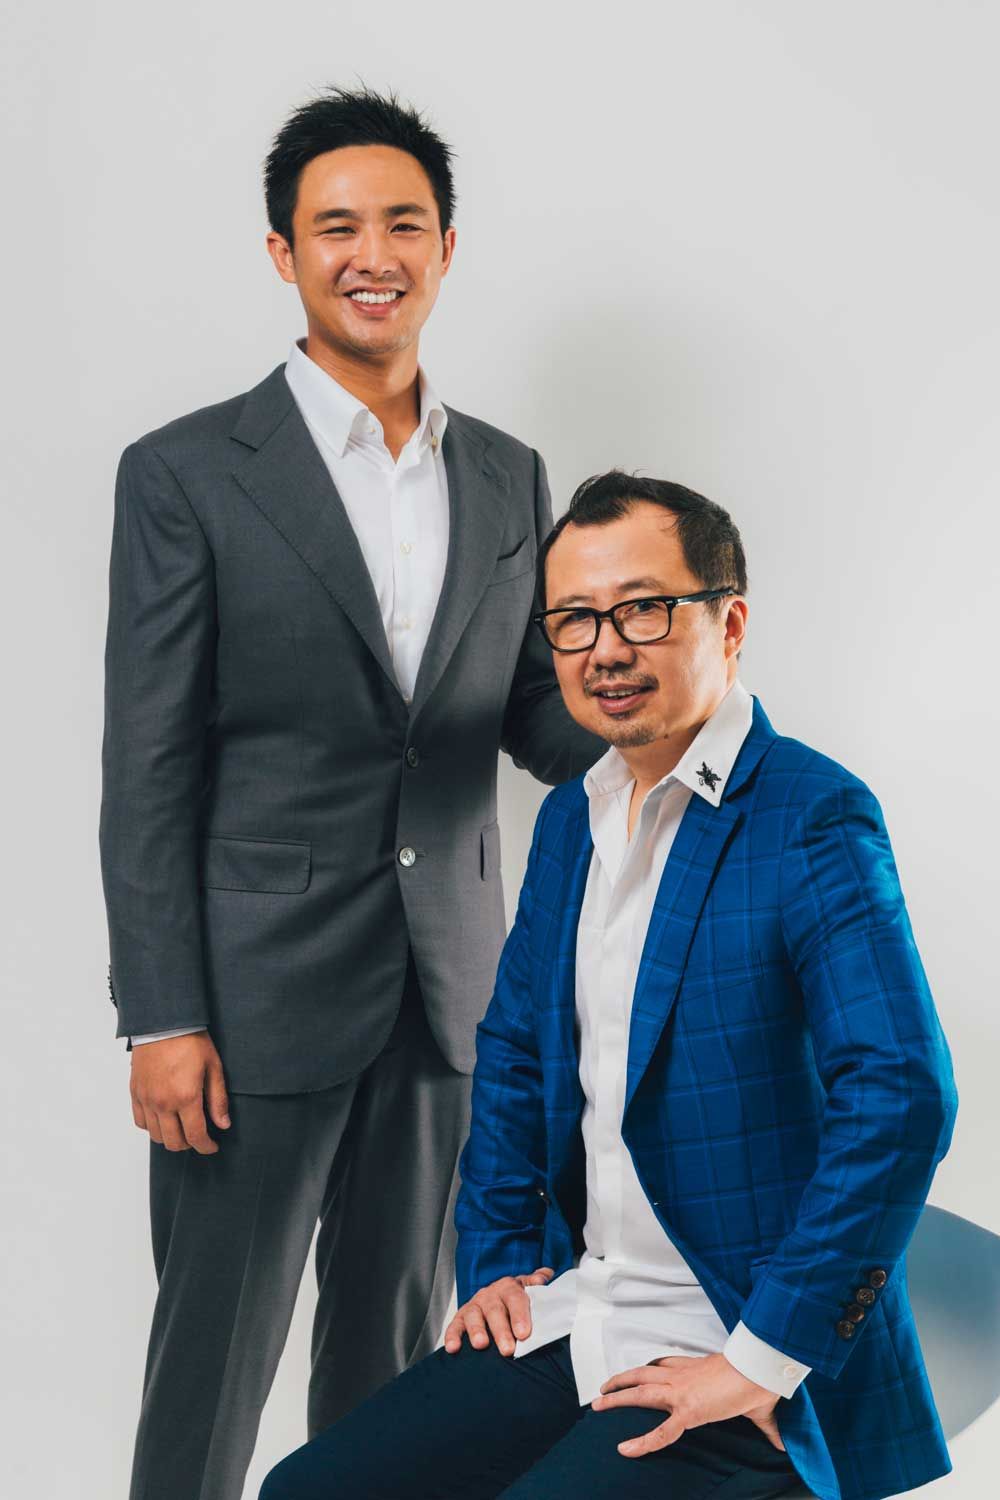 (L-R) Bryan Tan, Executive Director, Richard Mille Asia Pte Ltd with his father, Dave Tan, CEO of Richard Mille Asia Pte Ltd